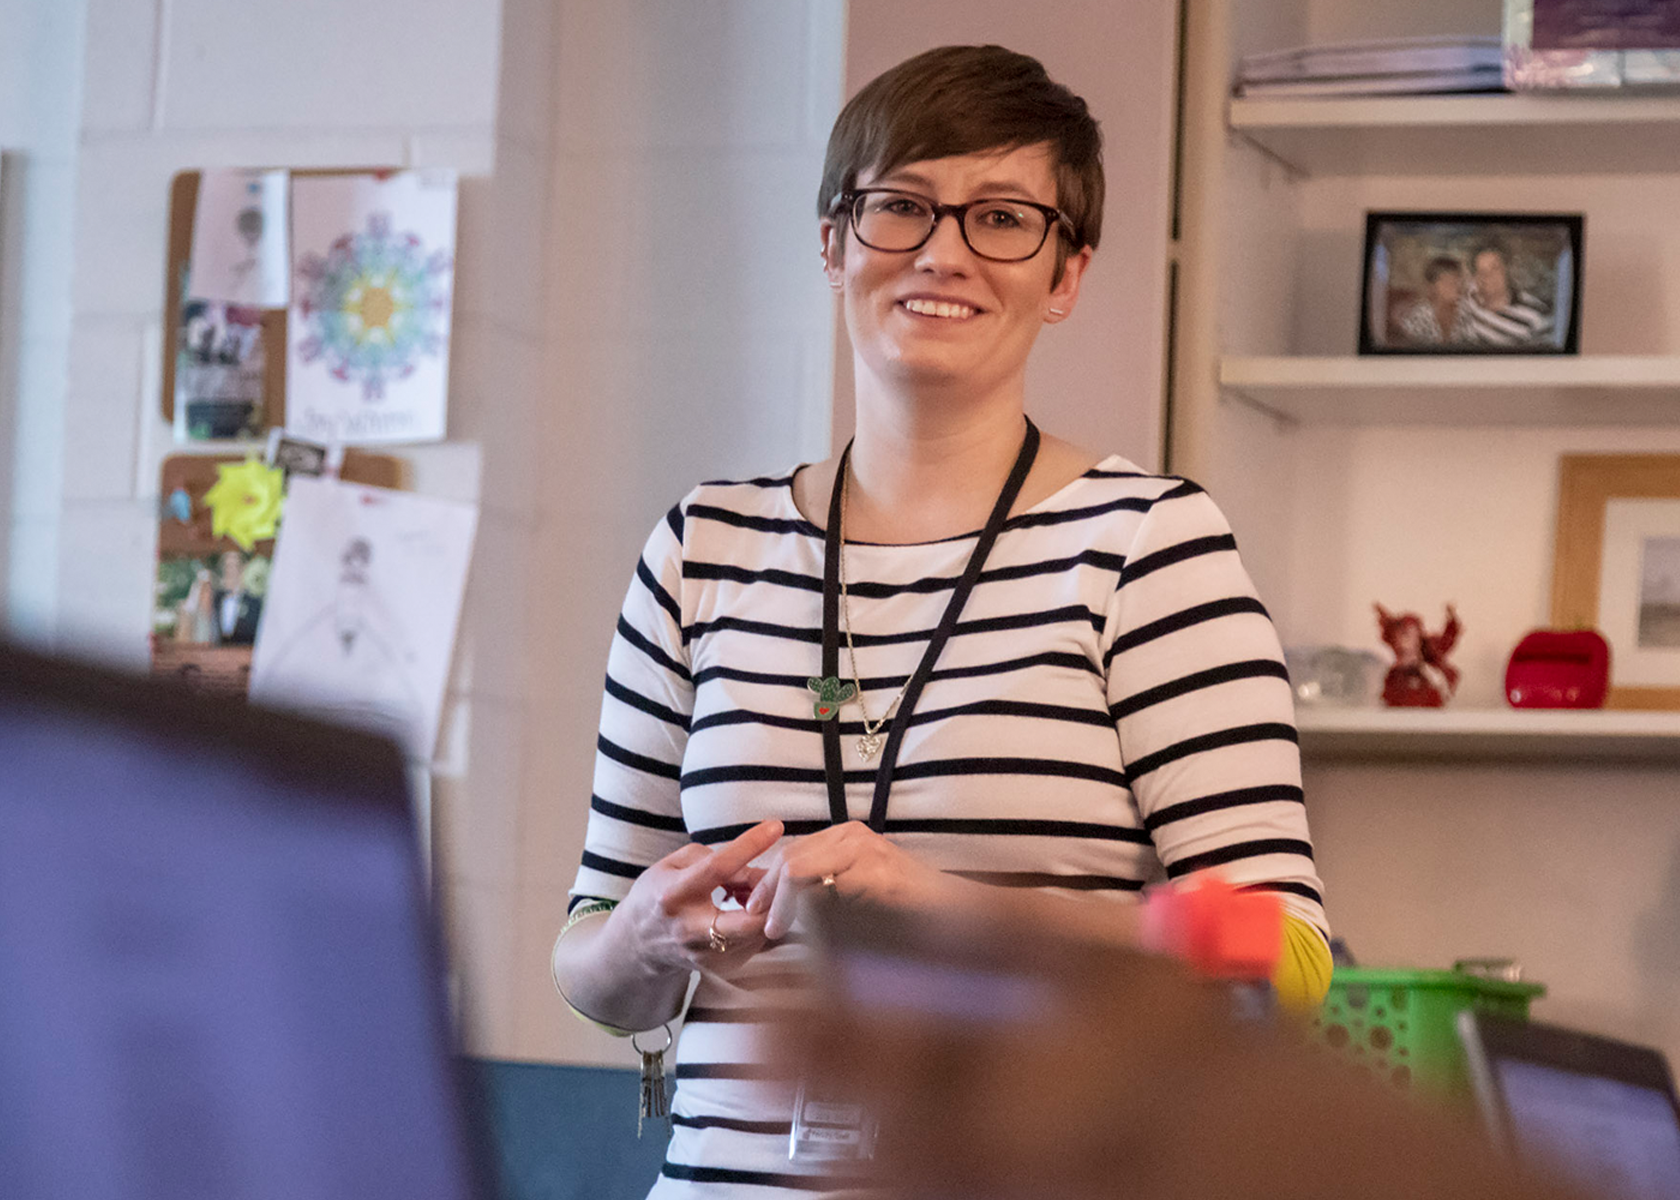 A teacher stands in front of a classroom smiling. She has short brown hair and is wearing a lanyard over her striped shirt